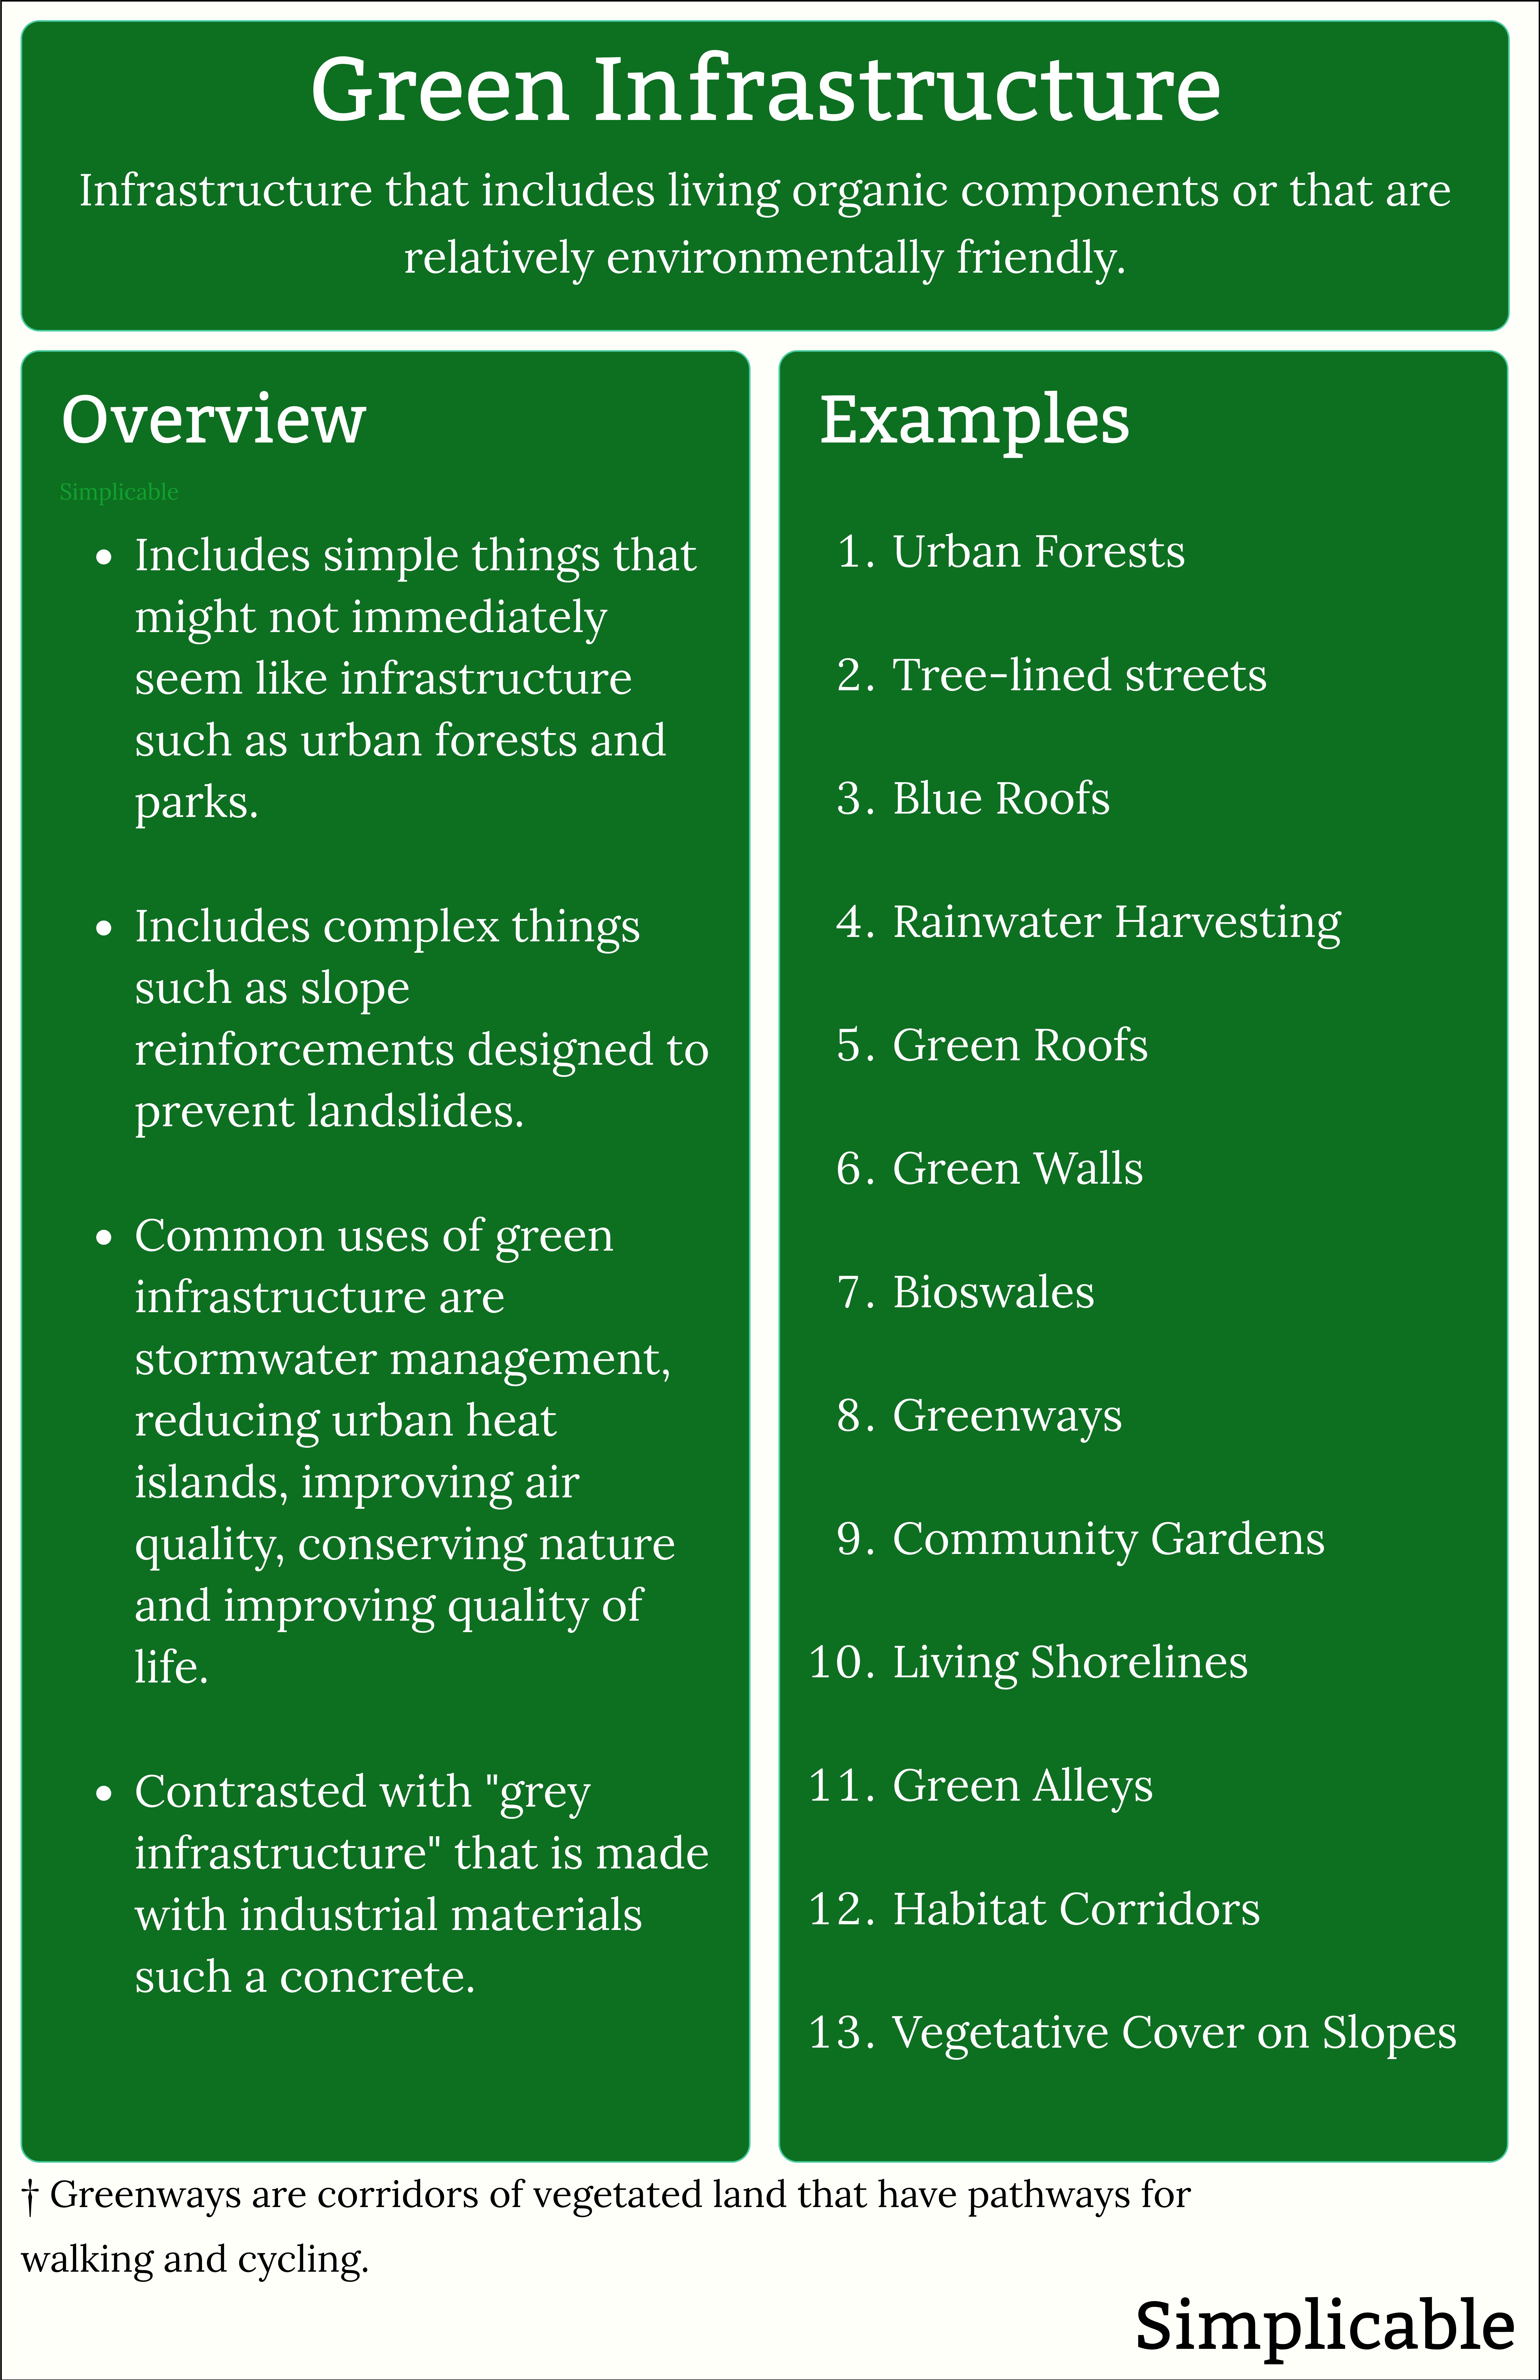 green infrastructure overview and examples